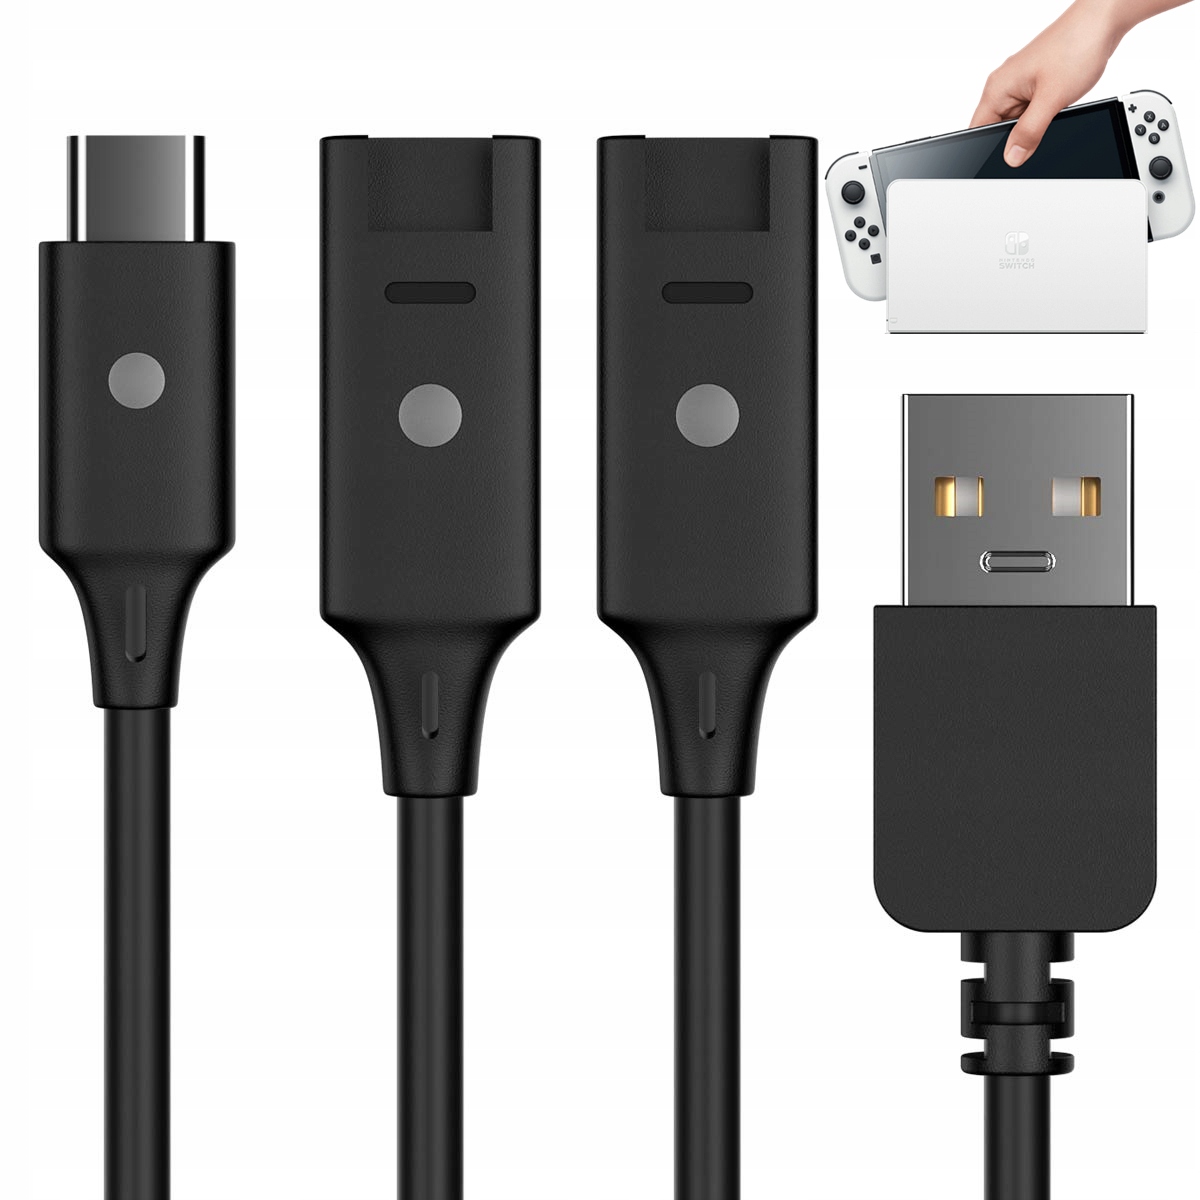 USB Type C Cable with Data/Charge Switch